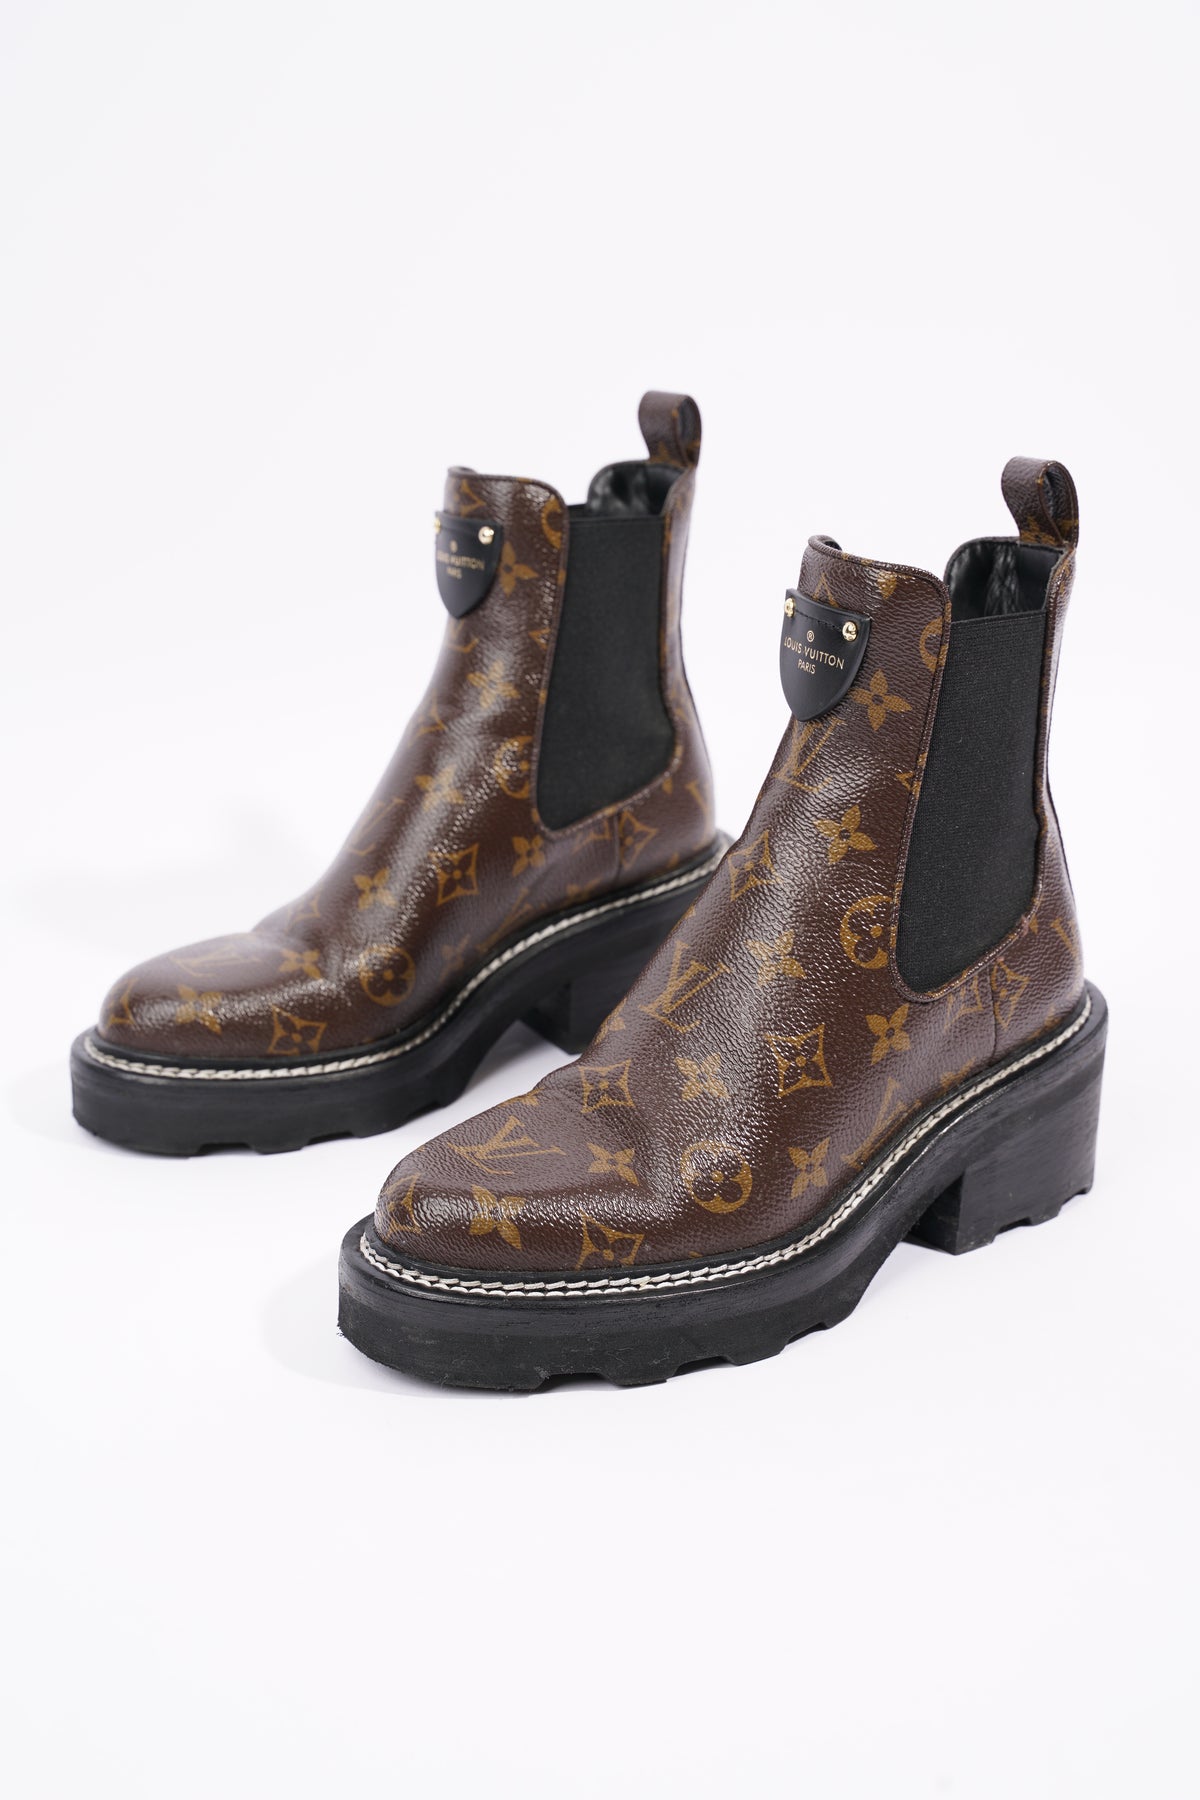 LV Beaubourg Ankle Boots - Luxury Brown